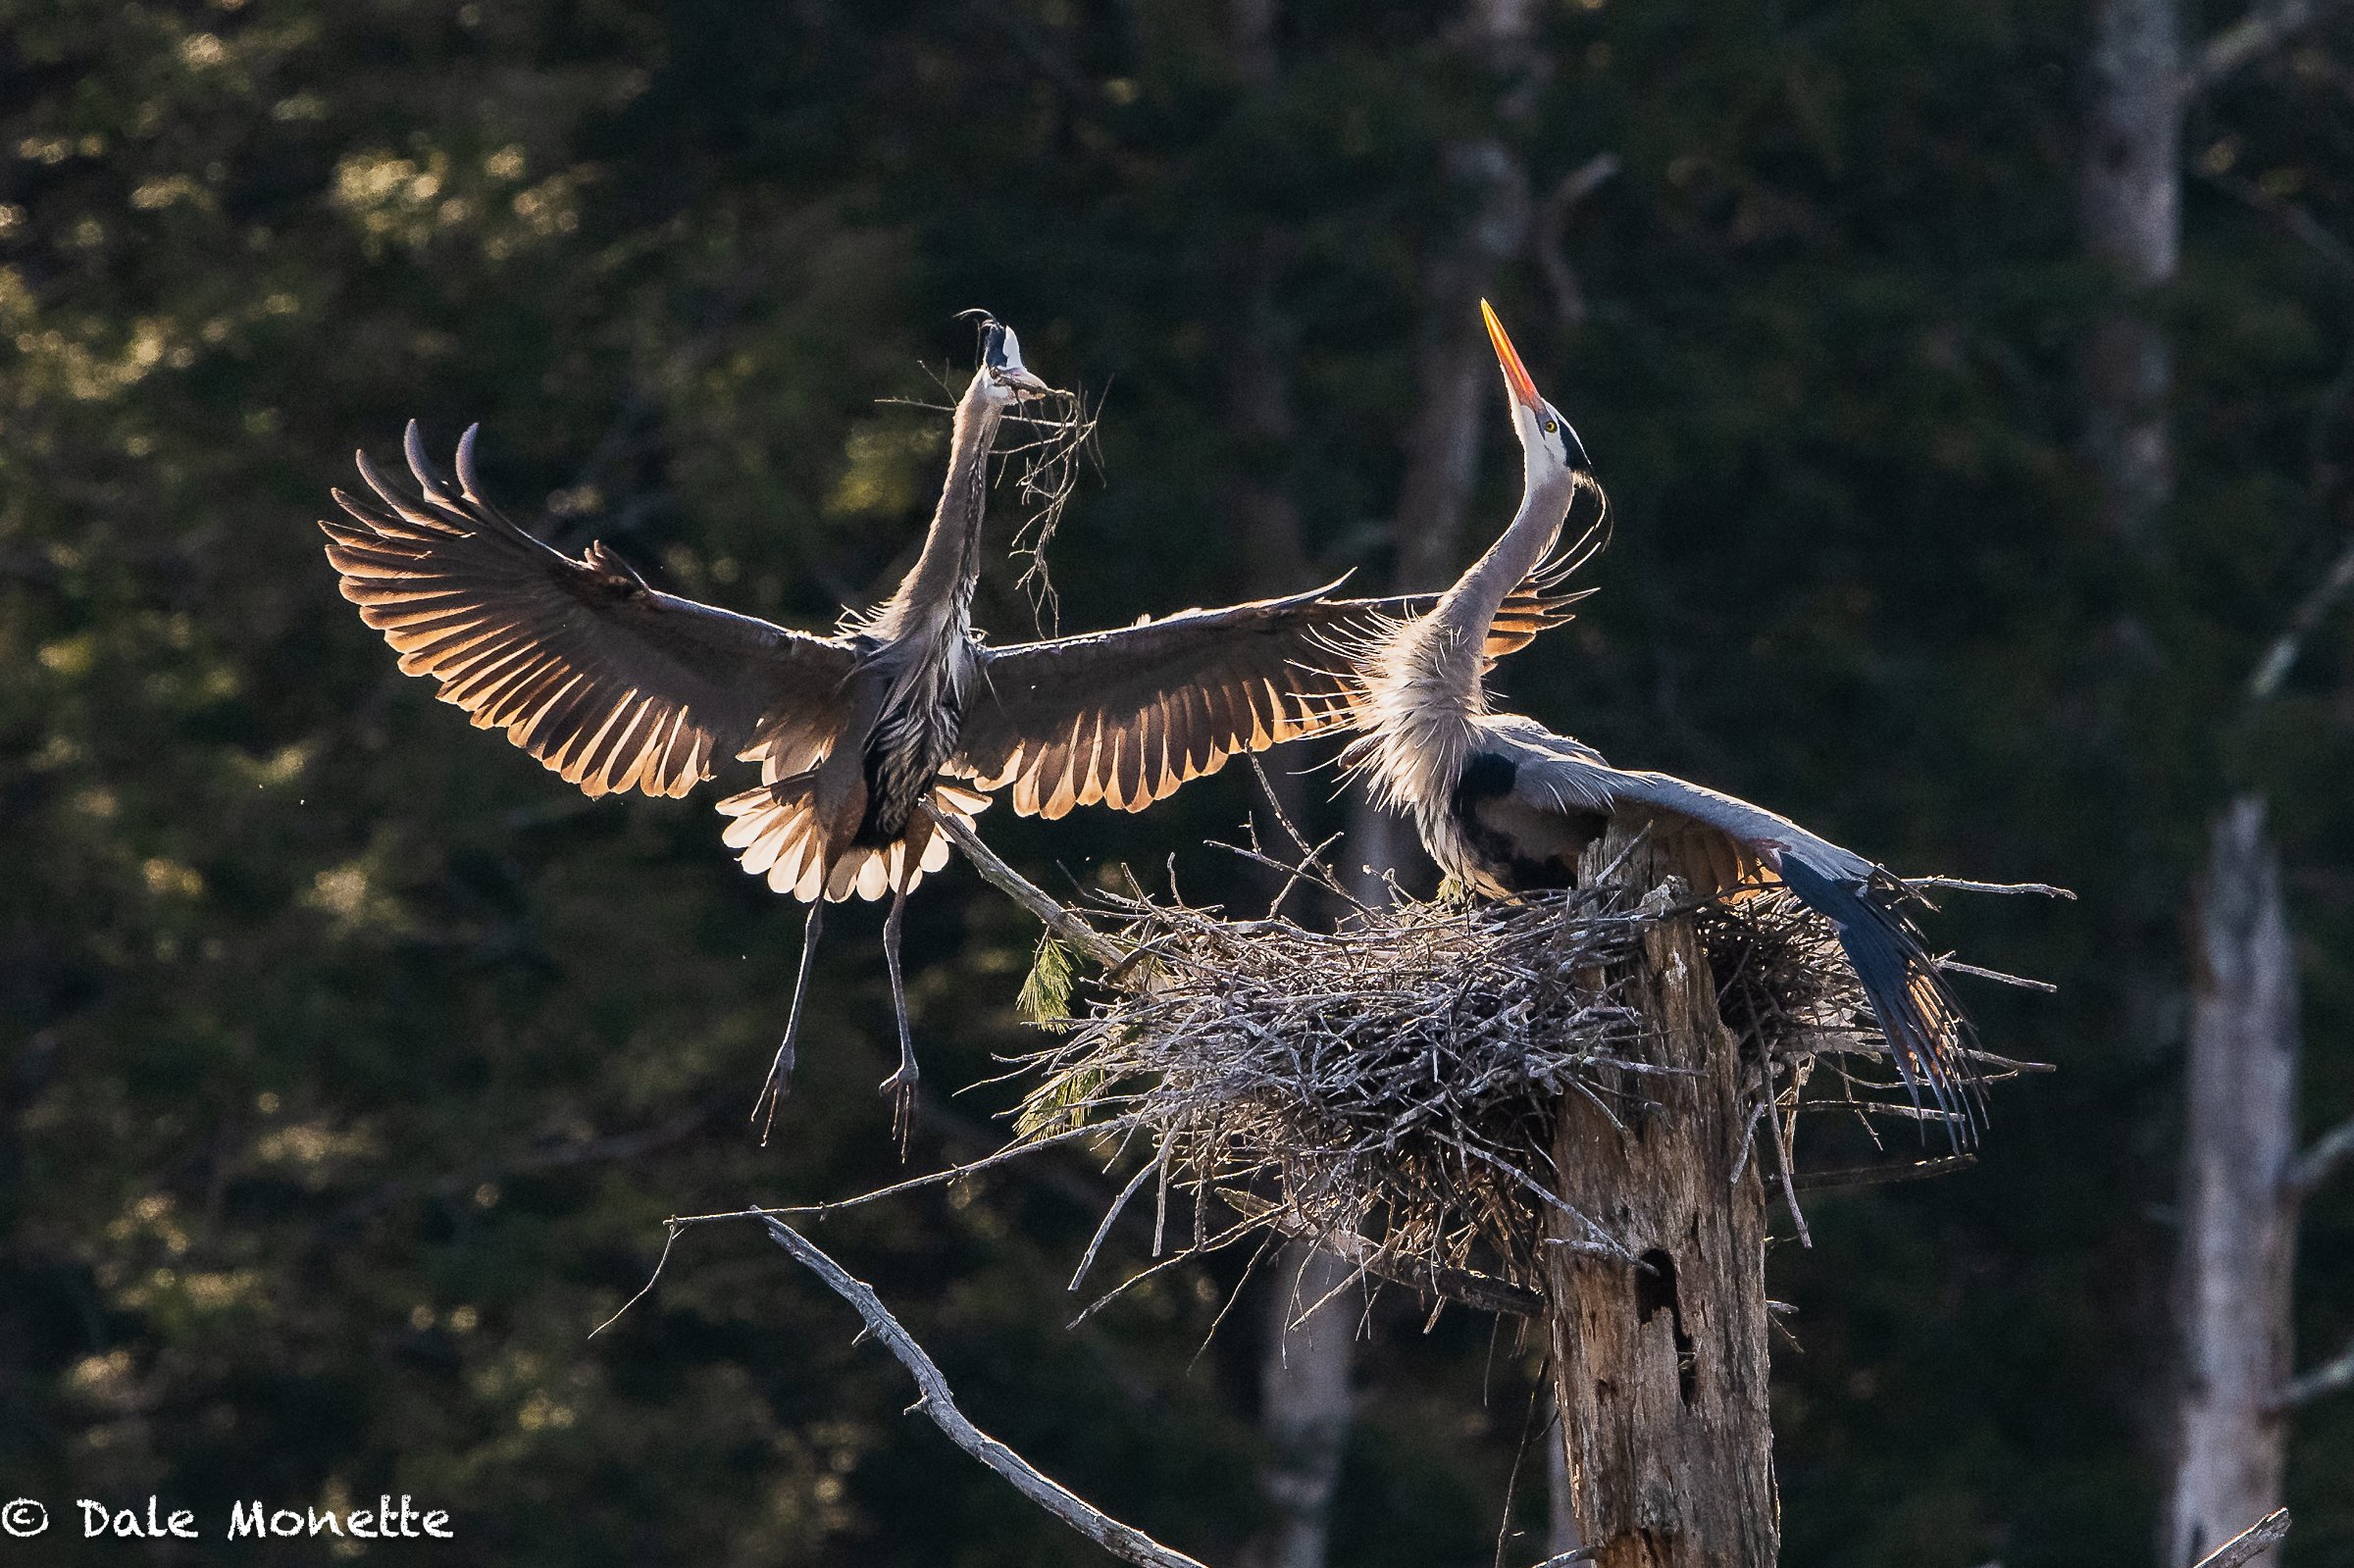   The great blue herons just keep on adding sticks the nests.   